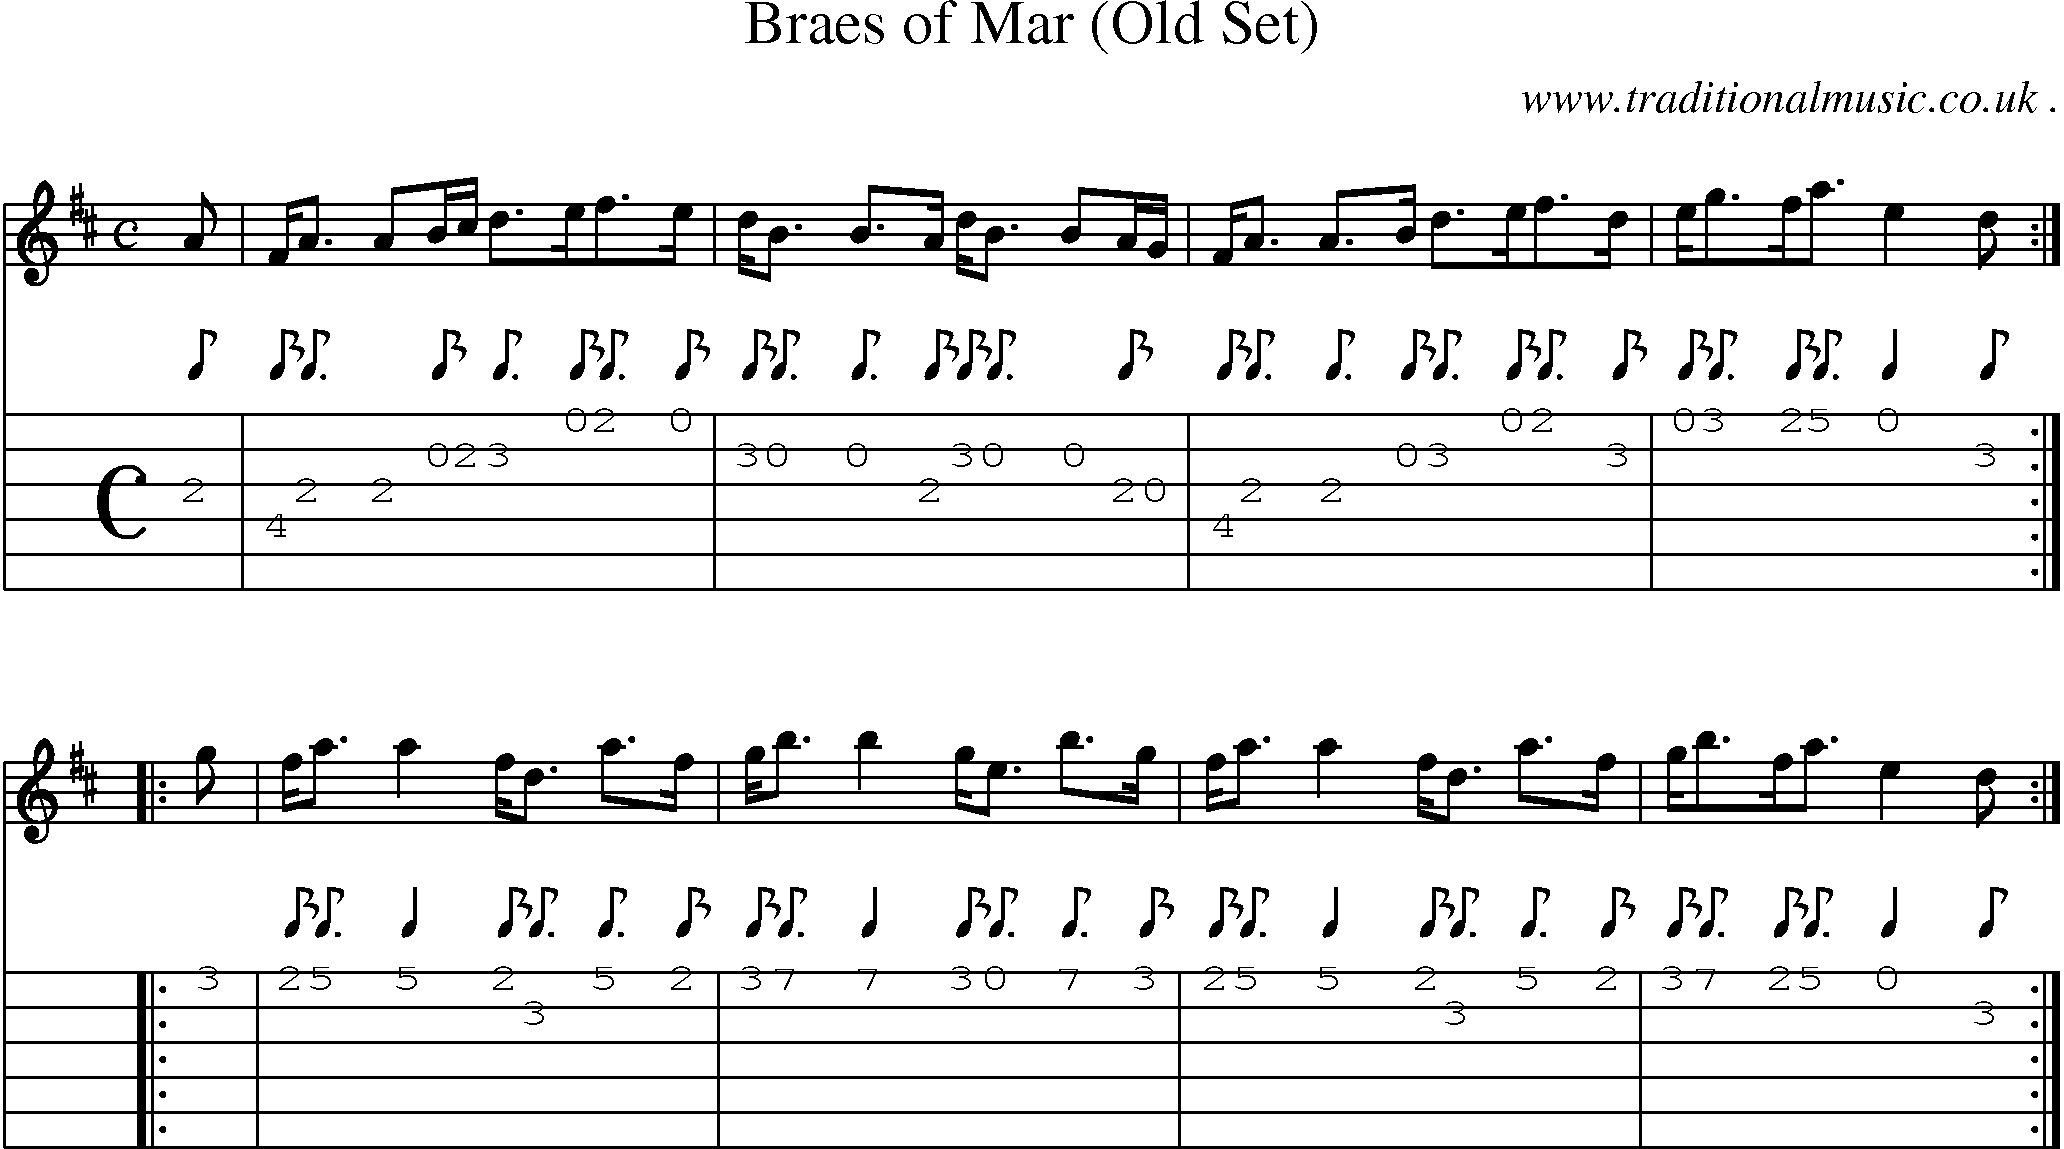 Sheet-music  score, Chords and Guitar Tabs for Braes Of Mar Old Set